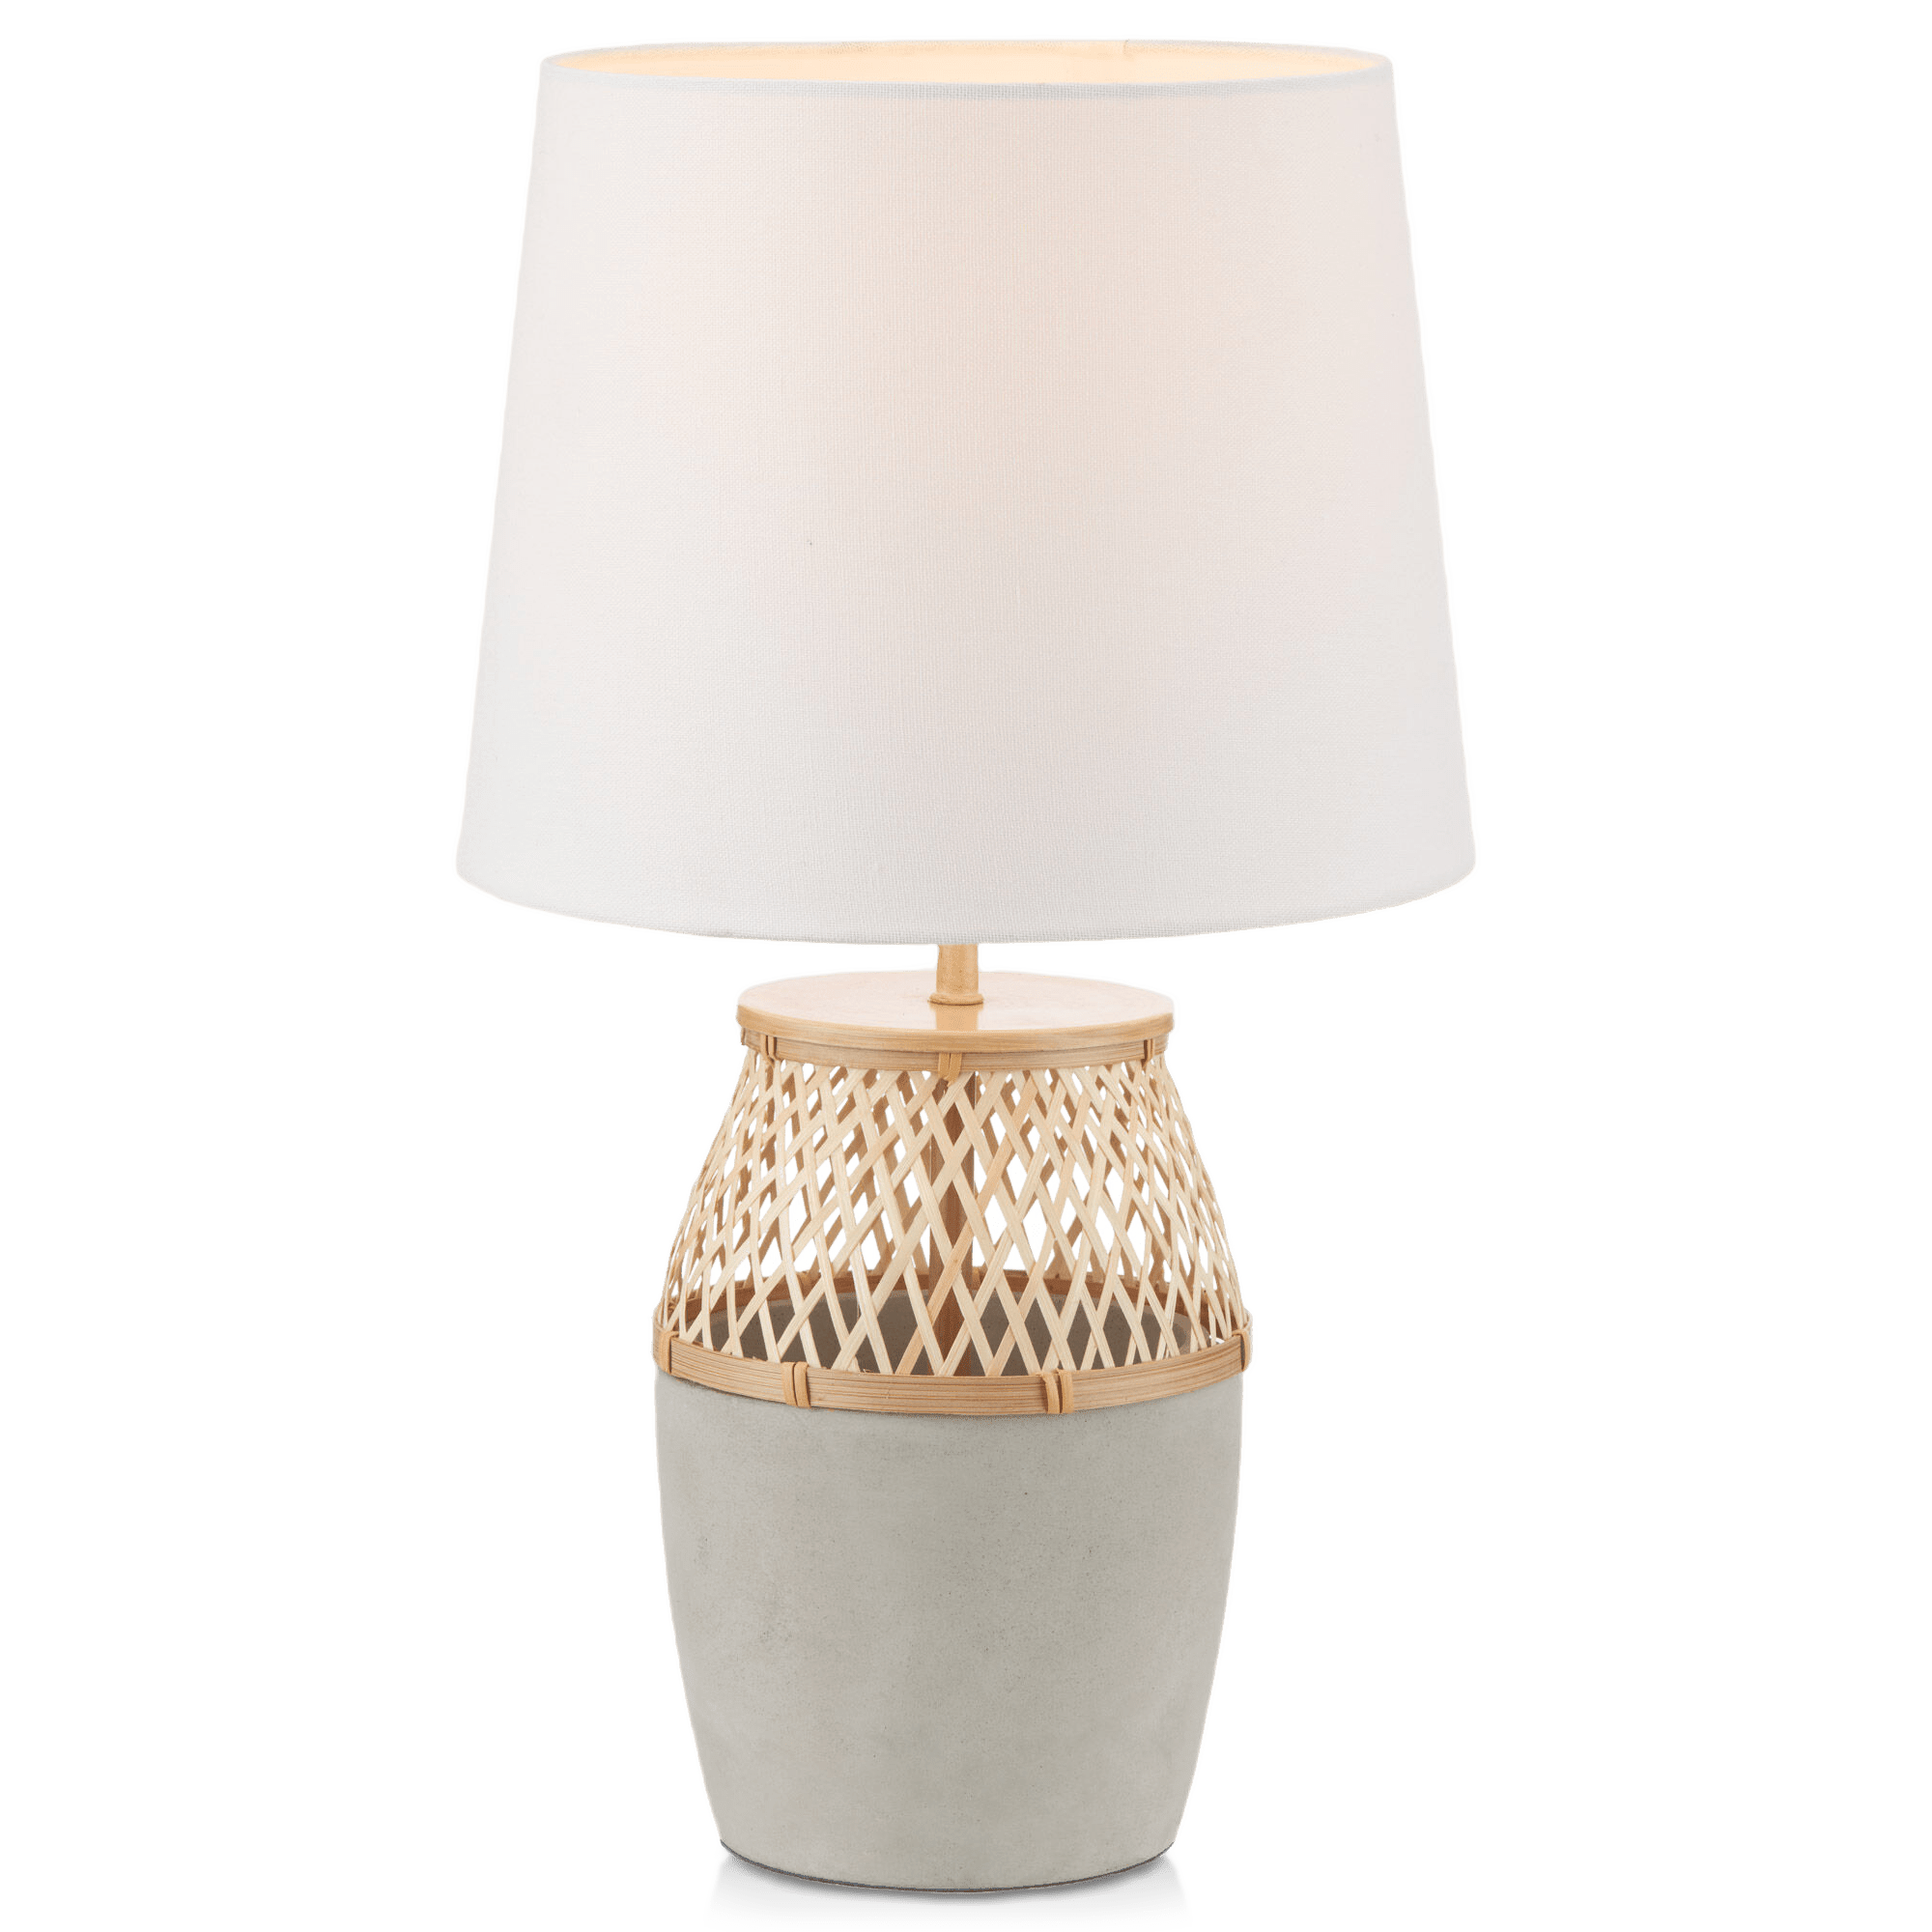 Cement and Rattan Table Lamp